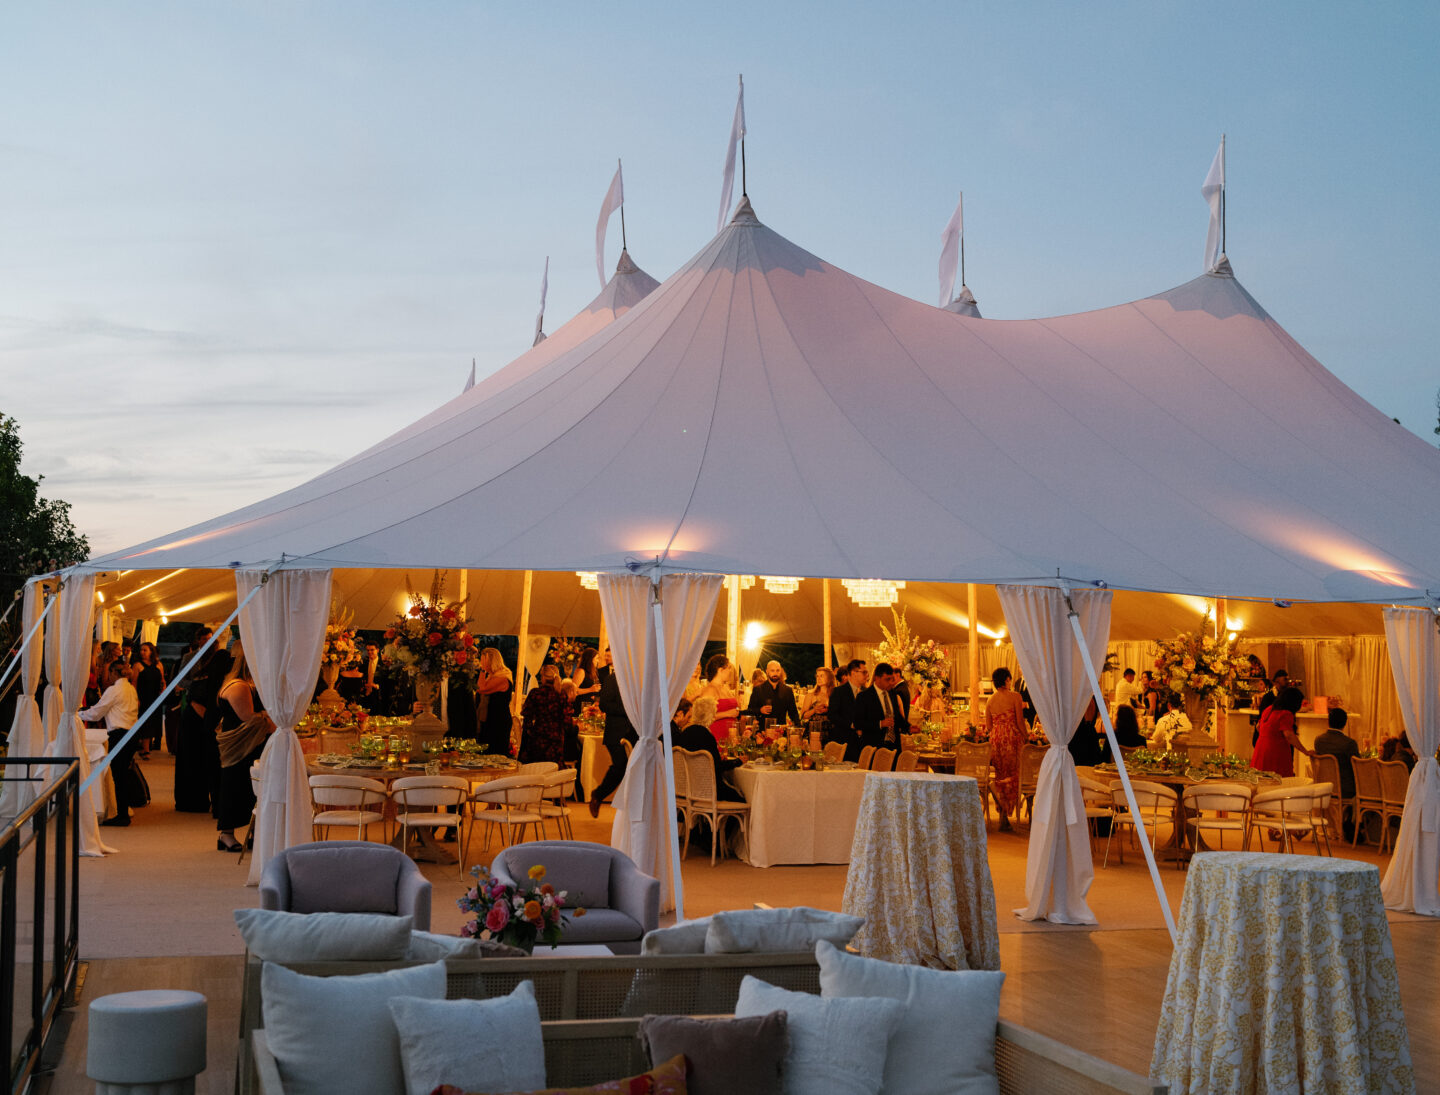 sperry sailcloth tent with seating arrangement infront during sunset